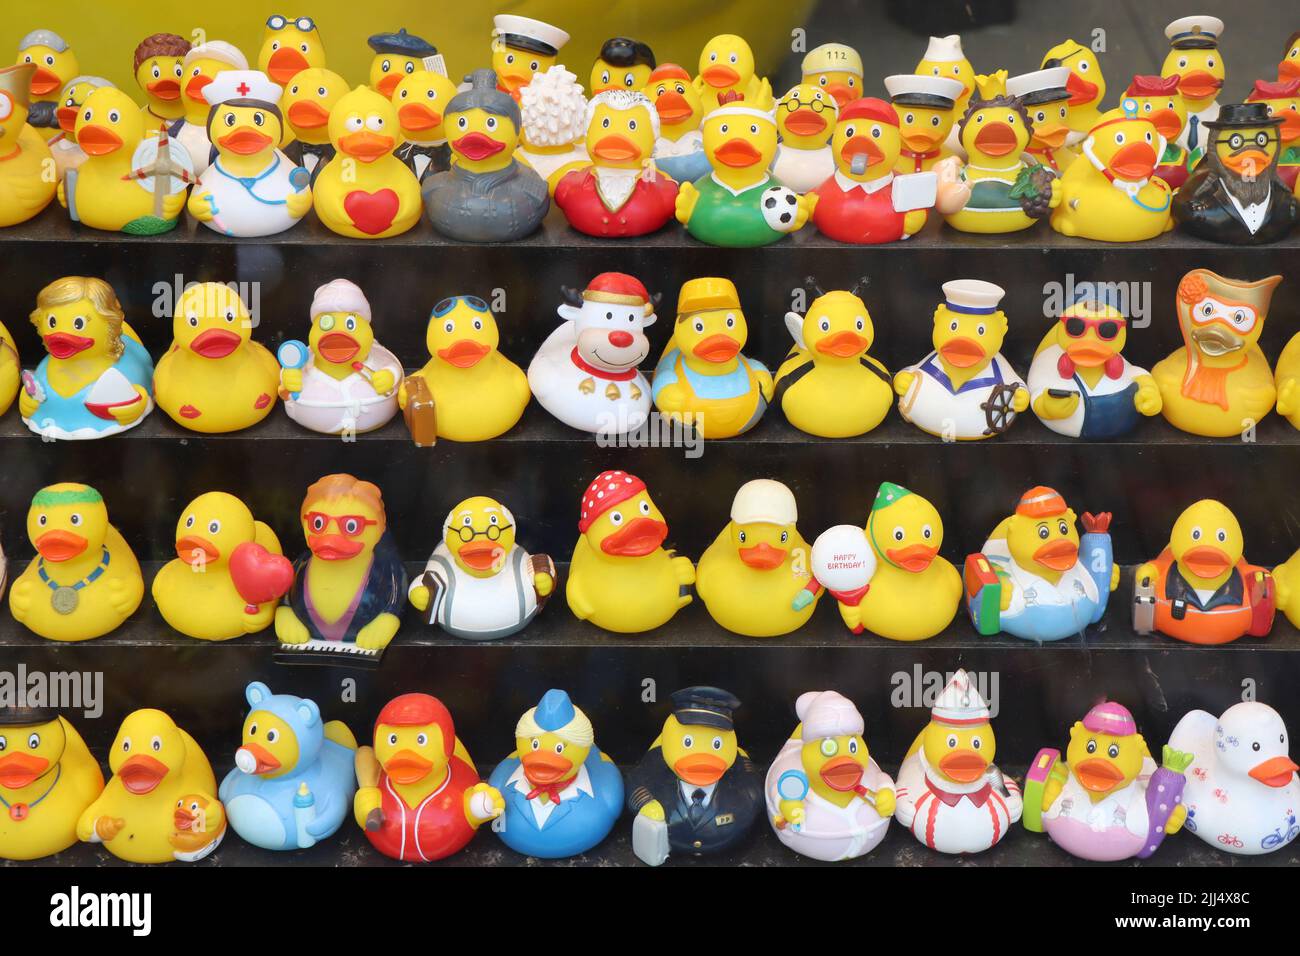 Amsterdam, Netherlands - June 23, 2022: Amsterdam duck store. Variety of funny rubber ducks such as as a souvenir in Amsterdam. Stock Photo